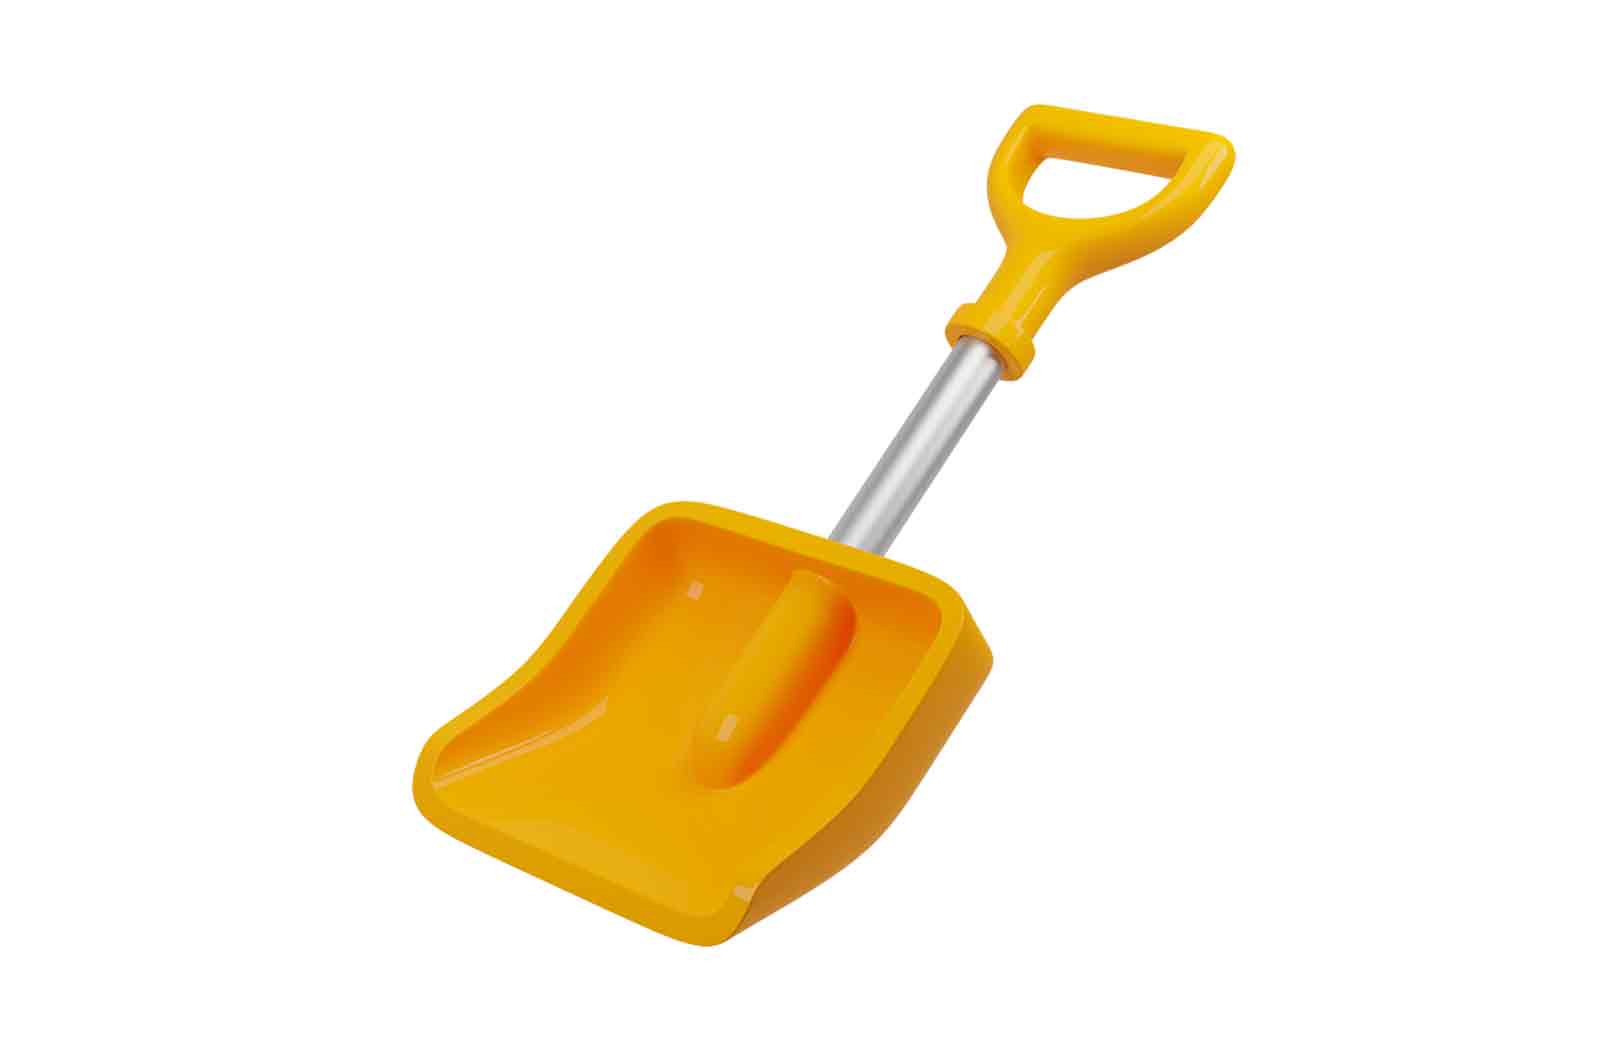 Wide plastic snow shovel 3d rendered illustration. Yellow handtool for cleaning snow isolated on white